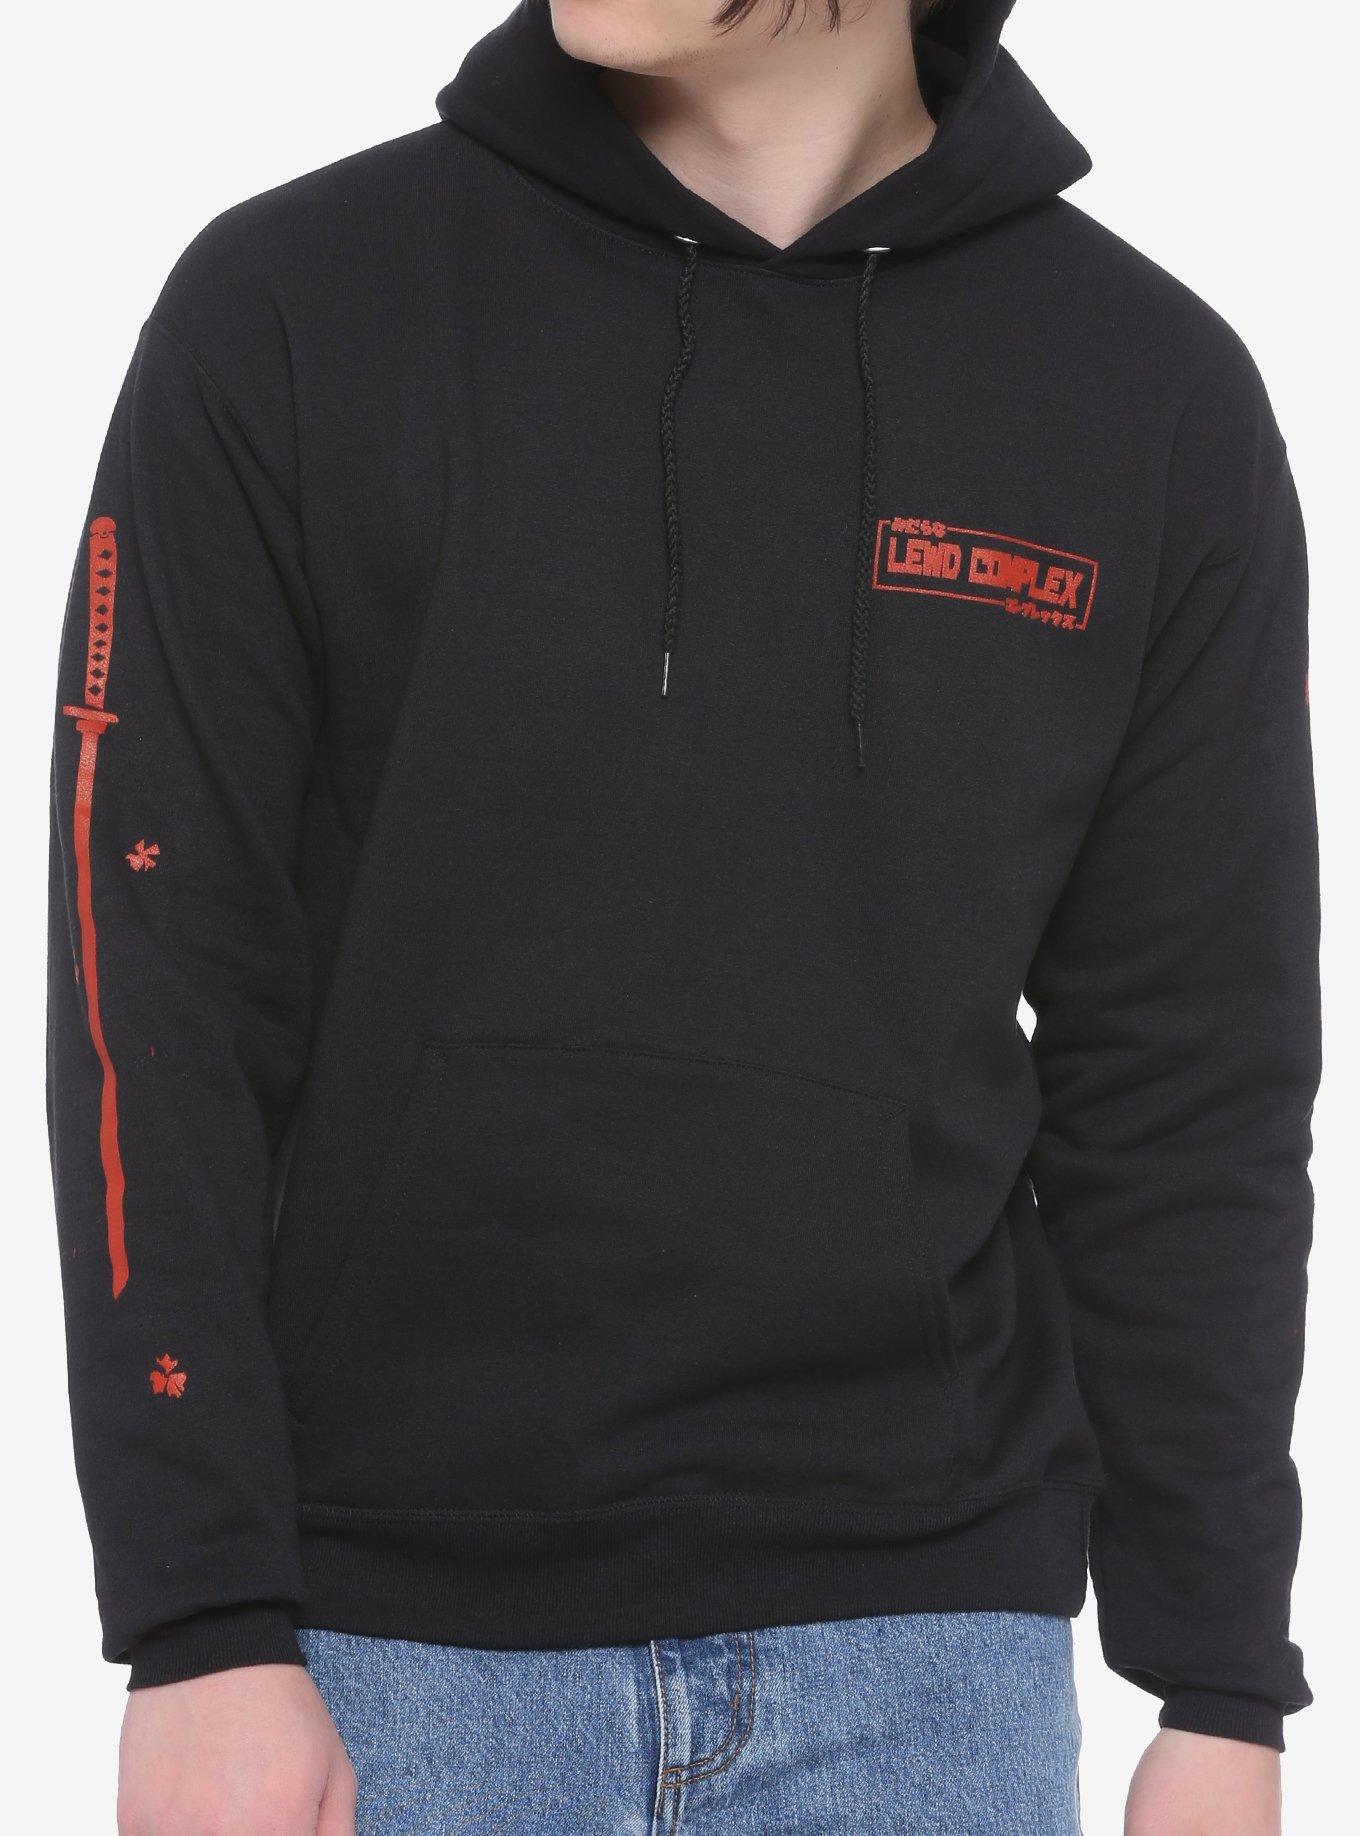 Lewd Complex Self-Reflection Hoodie, RED, alternate